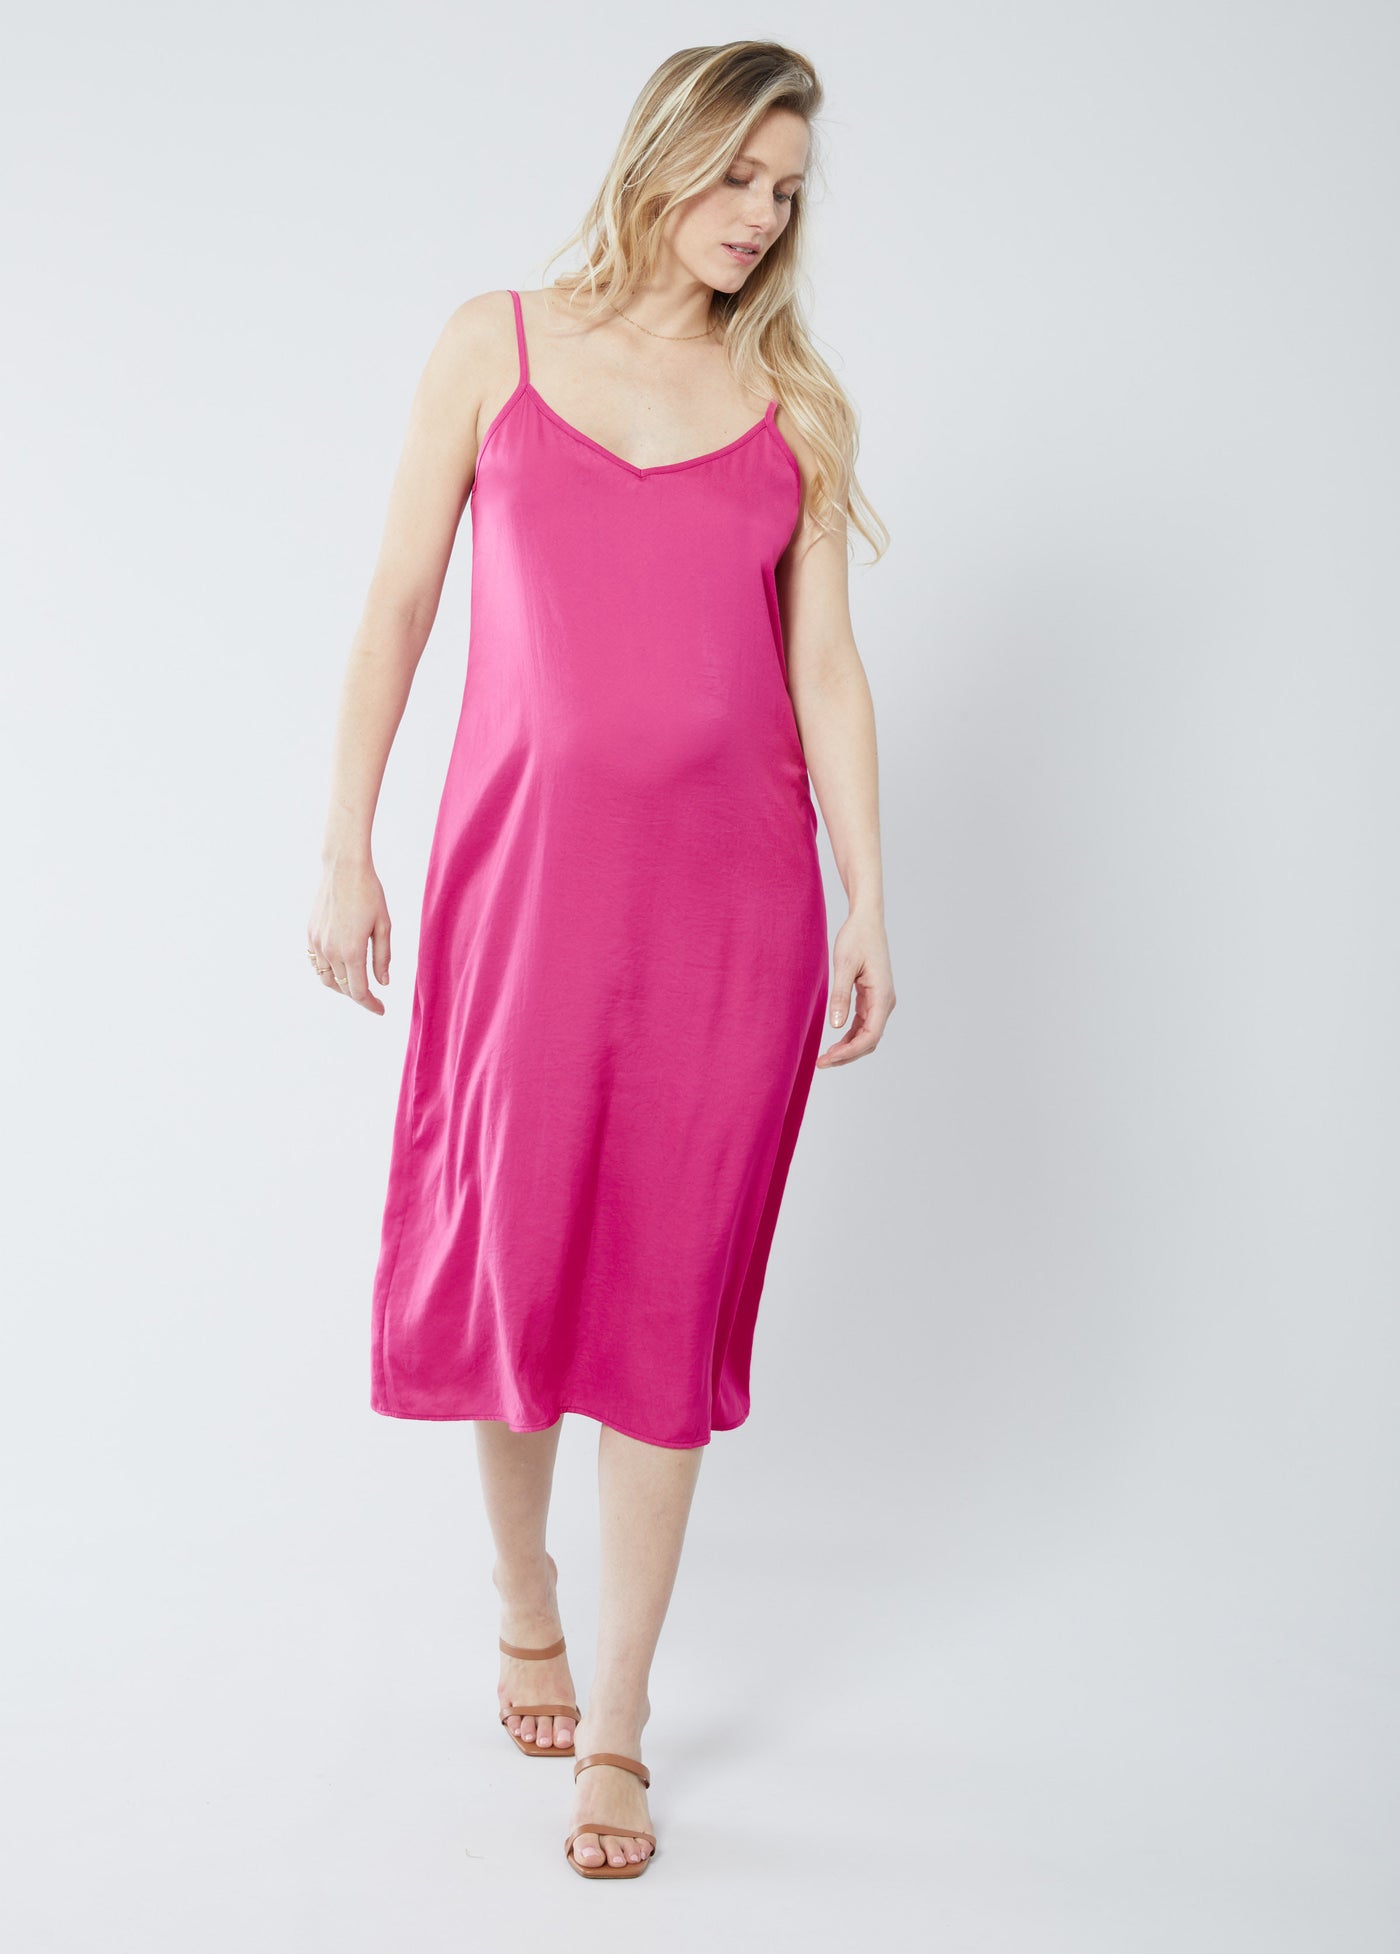 Silja is 5'9", 8 months pregnant and wearing a size small||Raspberry Rose